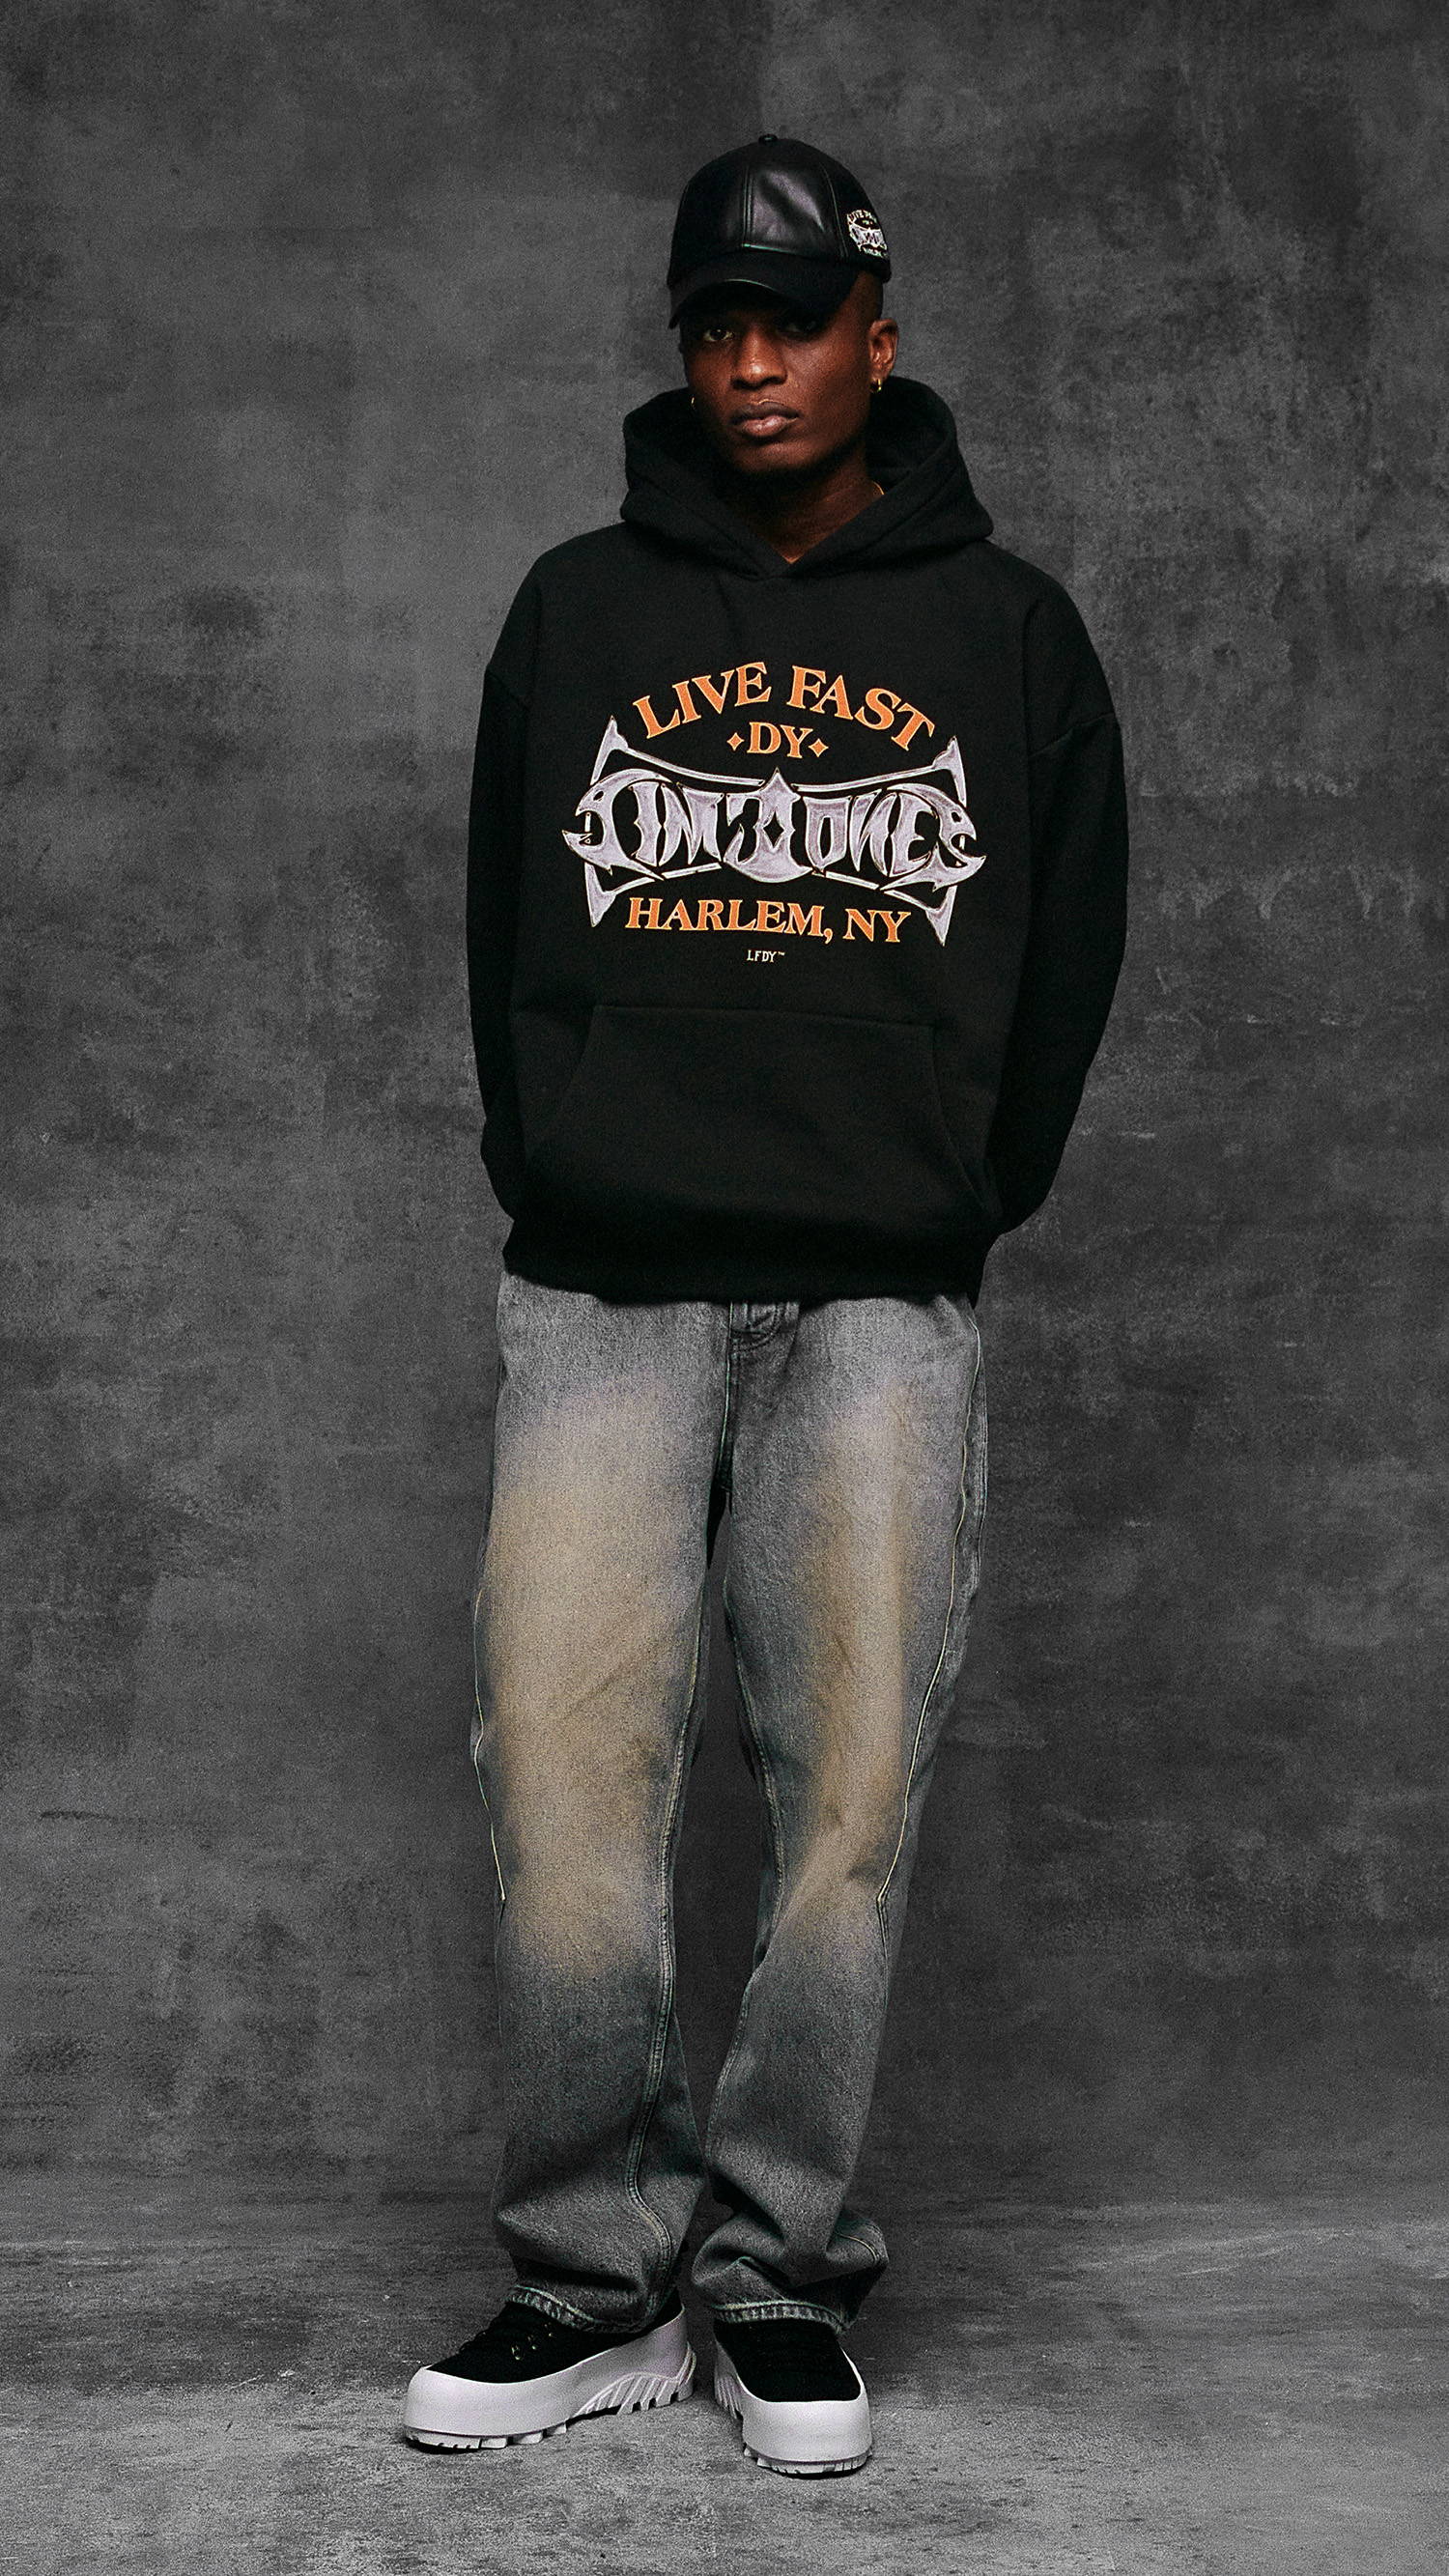 Winter Collection Looks 11/23 – LIVE FAST DIE YOUNG